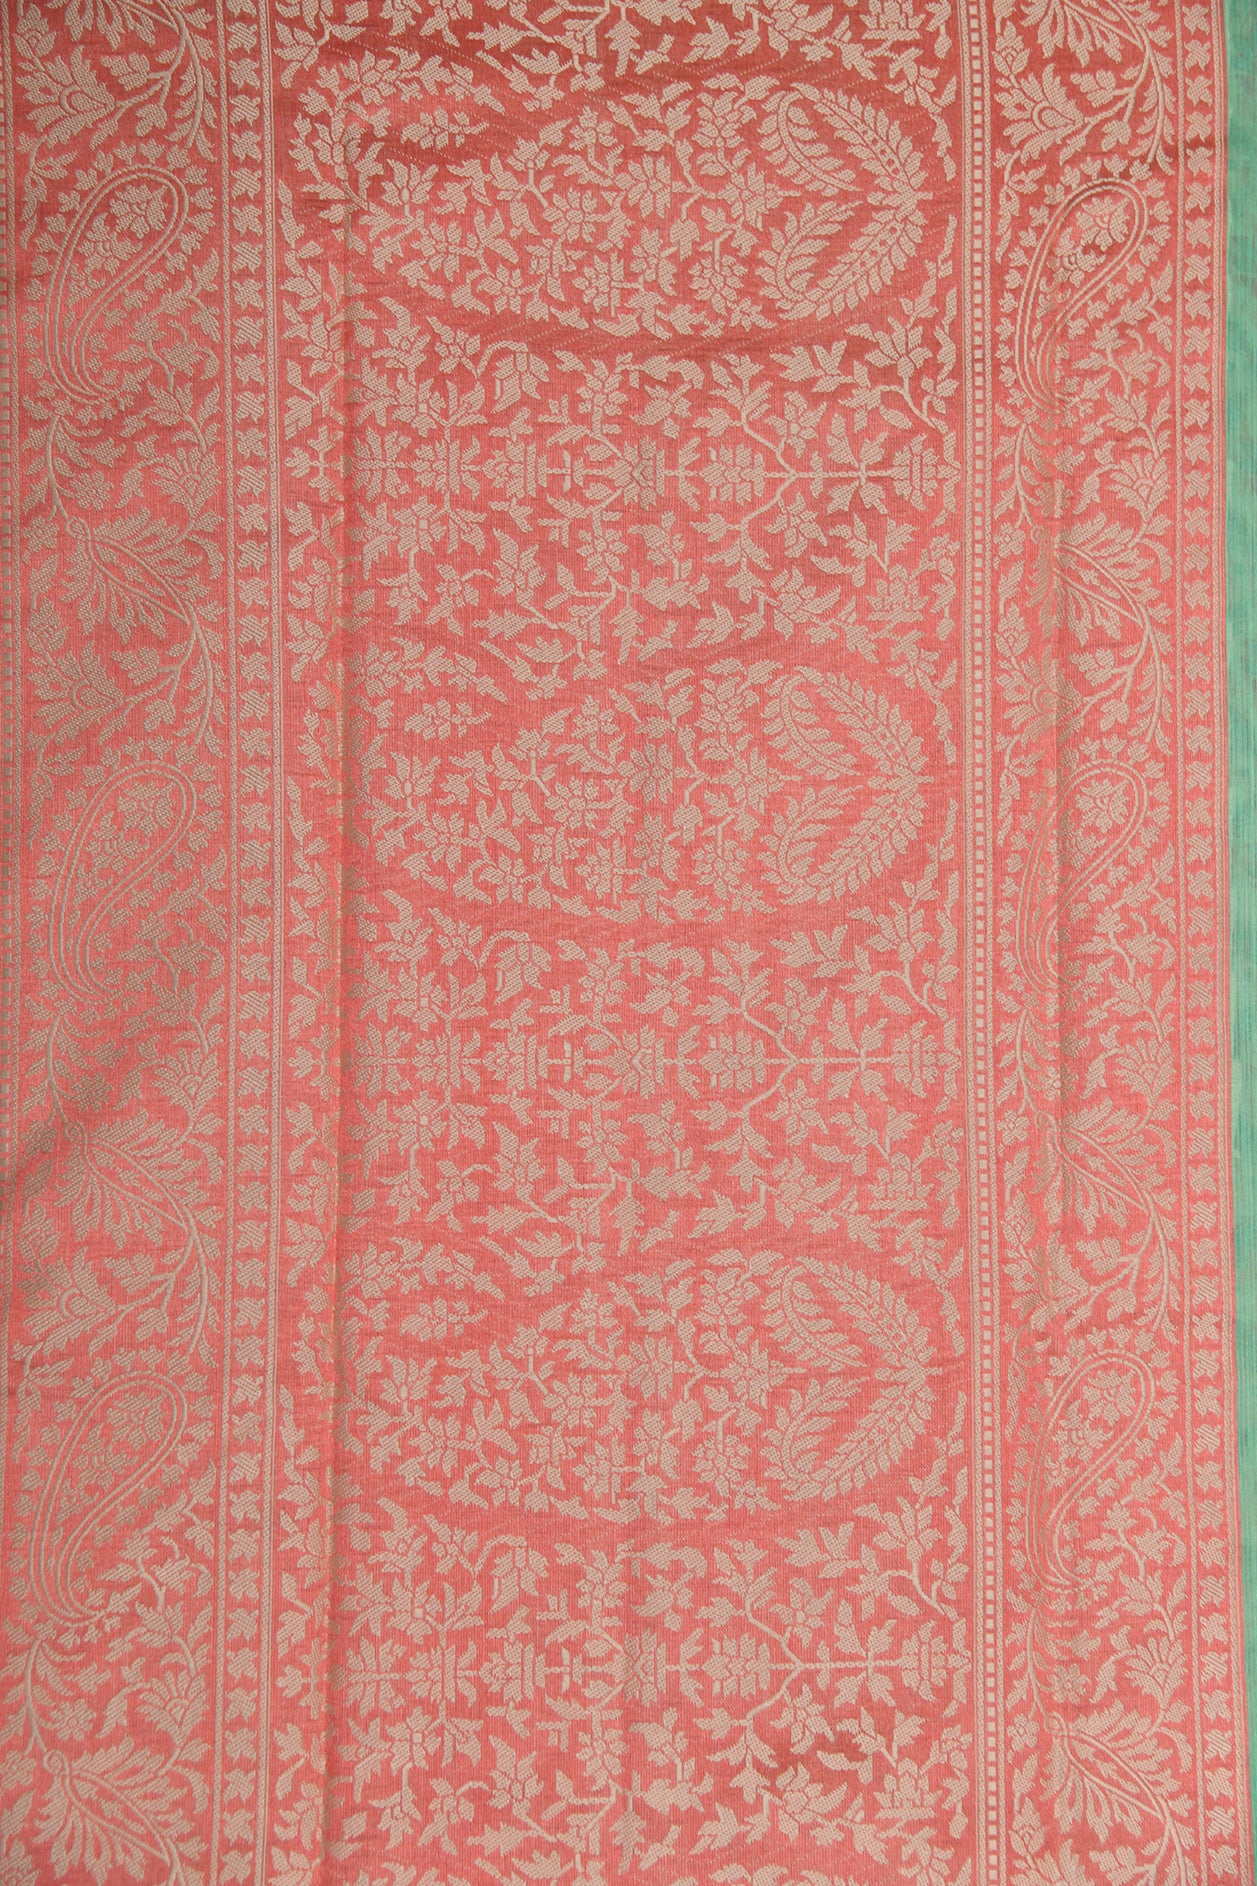 Thread Work Paisley Border With Printed Ogee Pattern Mint Green Chanderi Cotton Saree